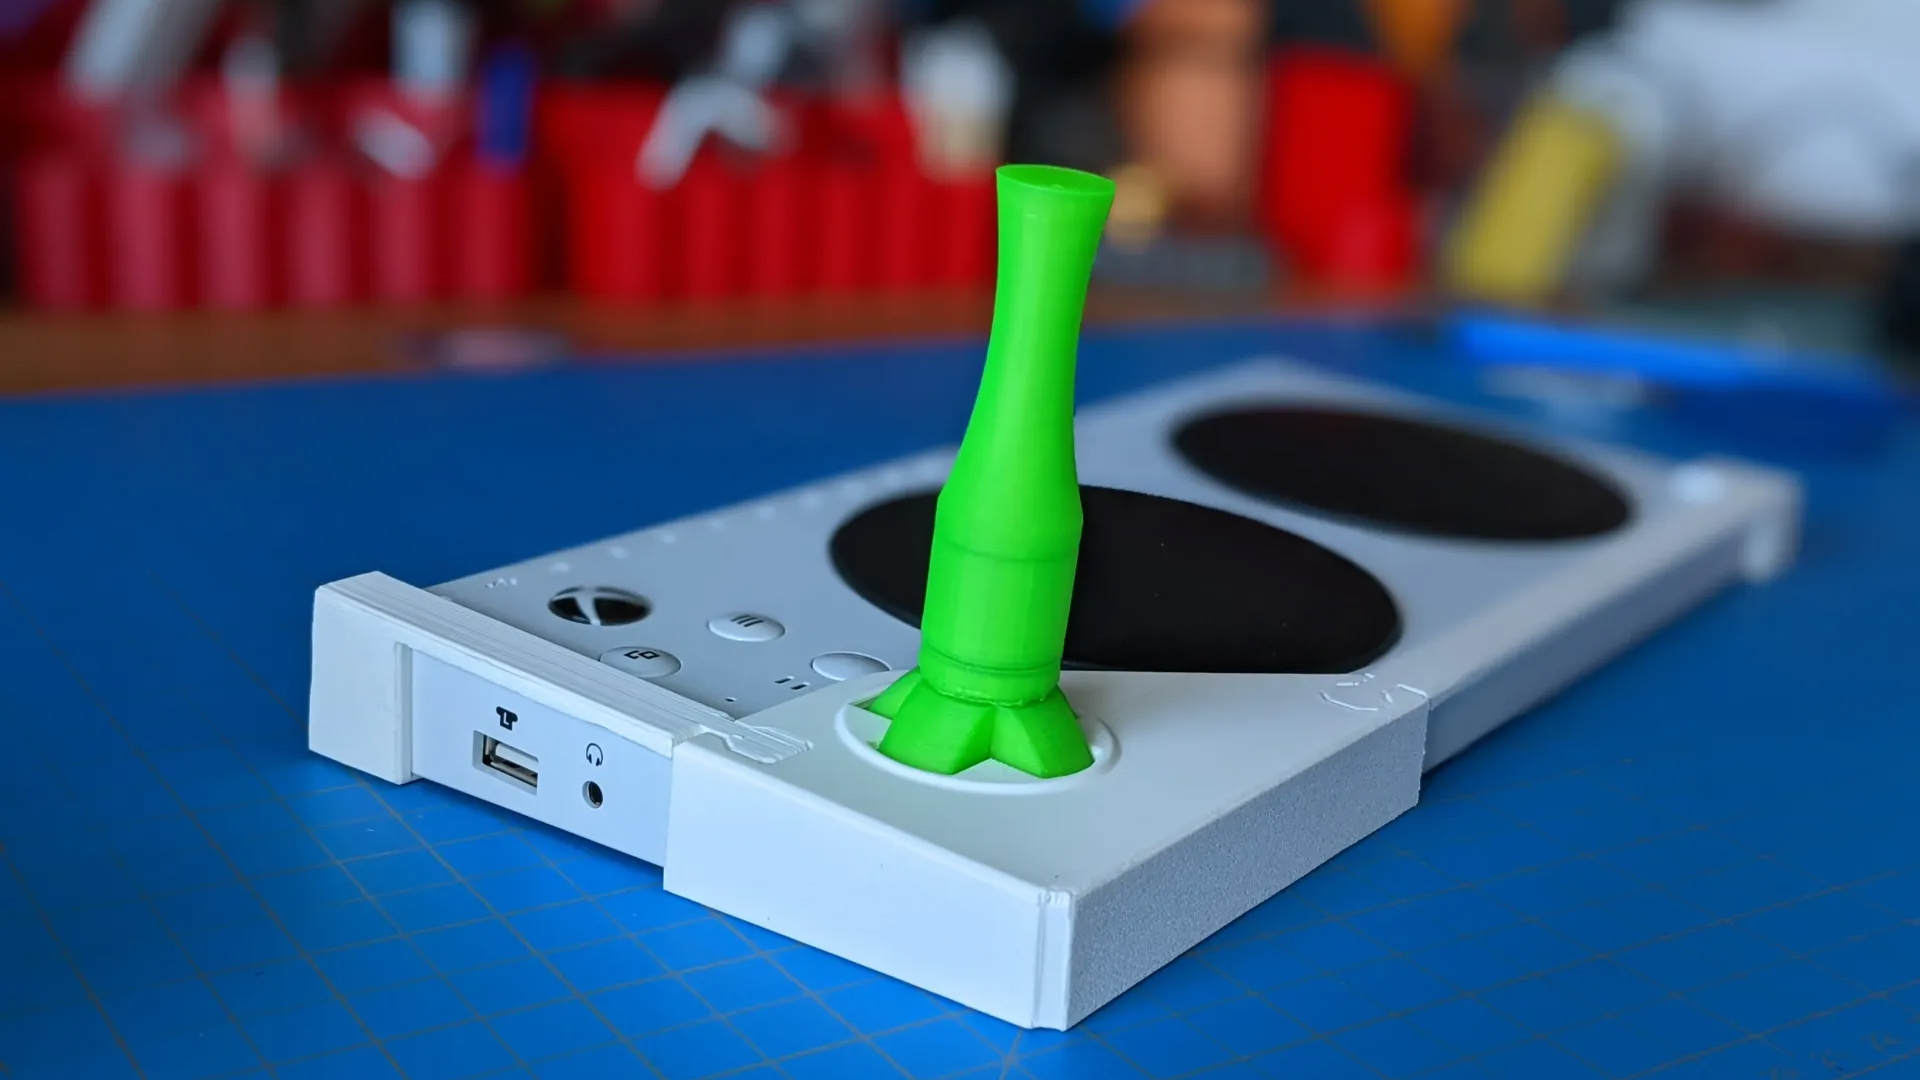 A 3D-printed joystick attachment connected to an Xbox Adaptive Controller.